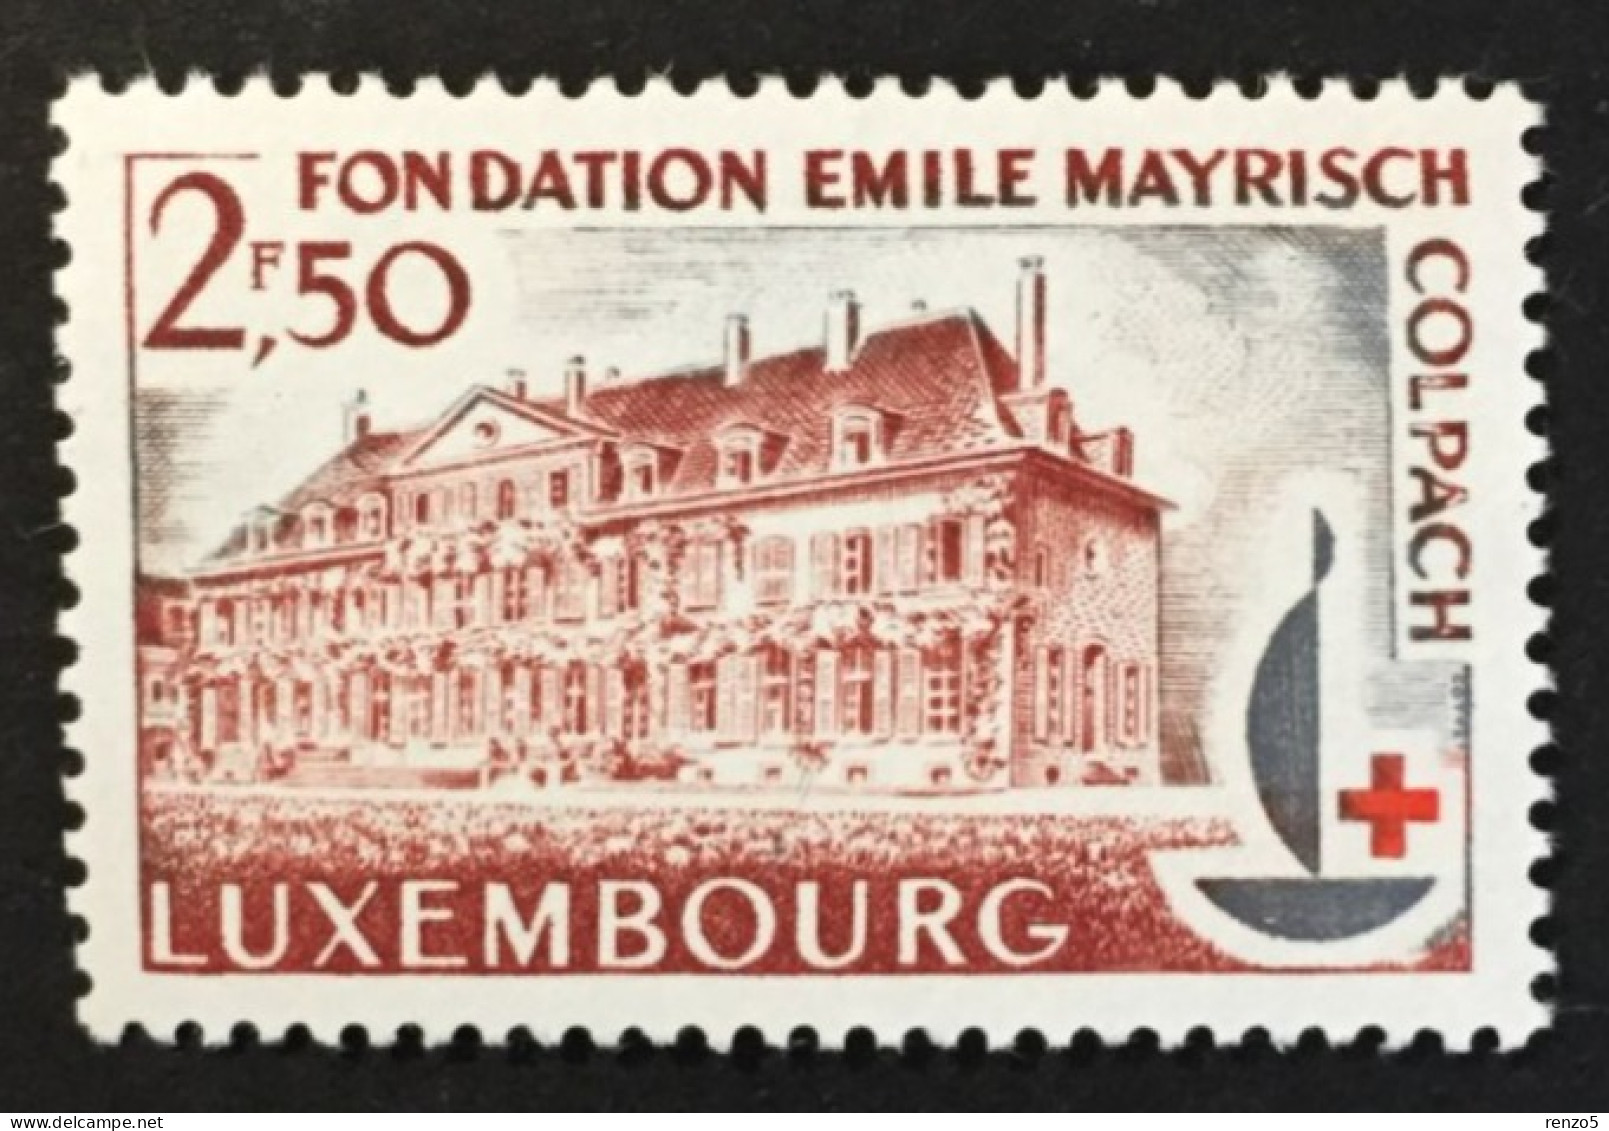 1963 Luxembourg - Colpach Castle And The Centenary Emblem Red Cross - Unused ( Imperfect Gum ) - Ongebruikt